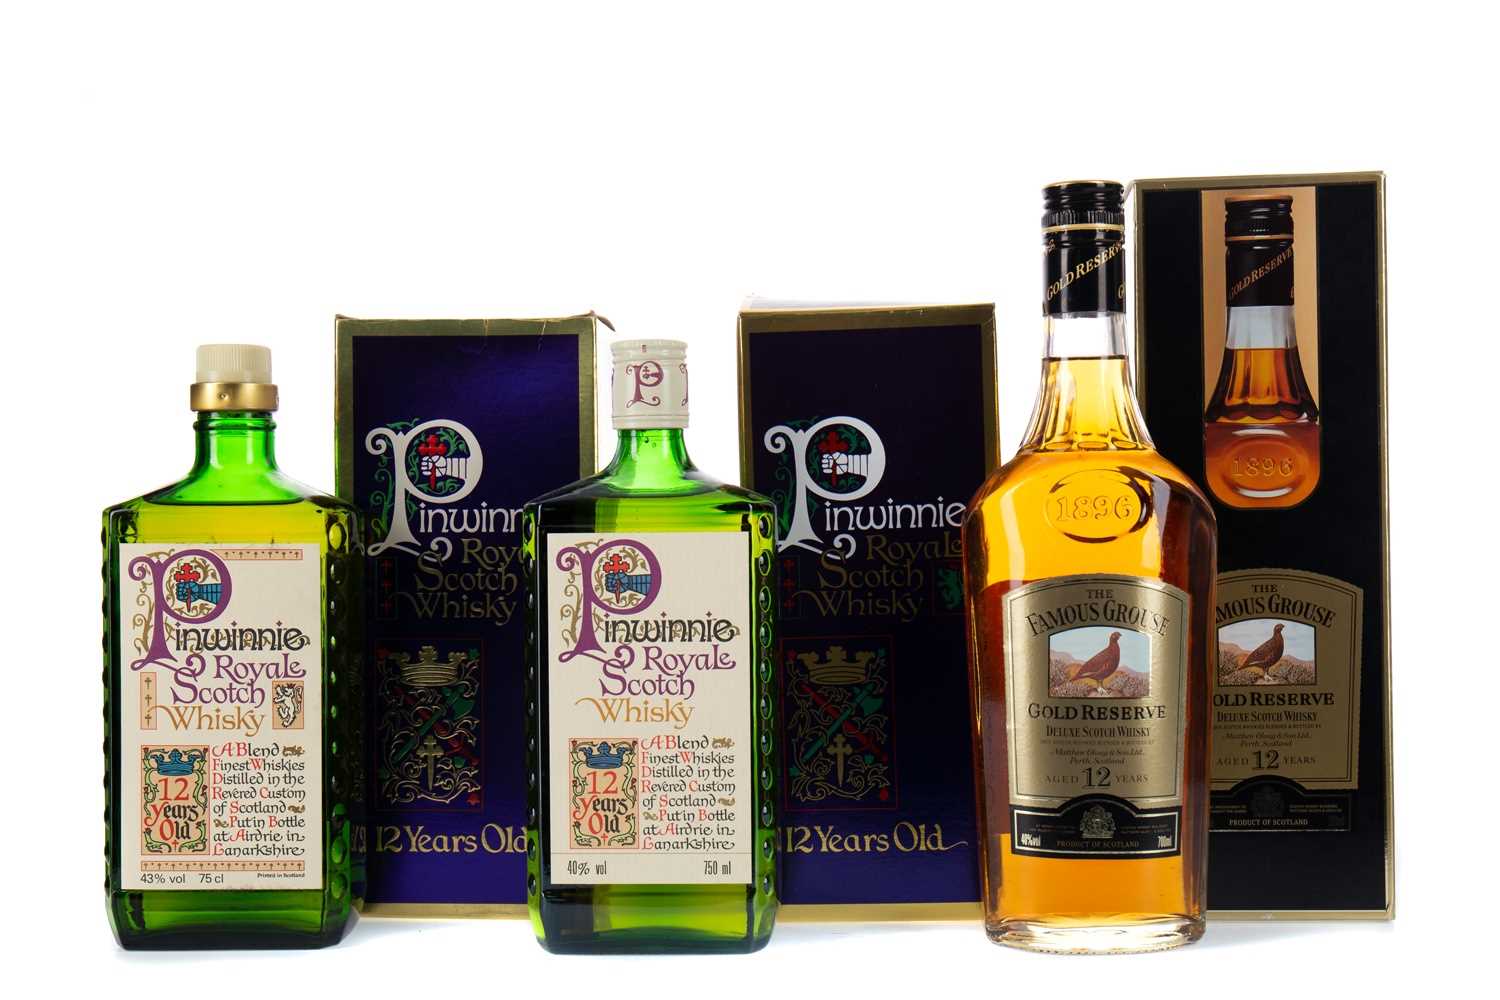 Lot 95 - TWO BOTTLES OF PINWINNIE ROYAL AND FAMOUS GROUSE GOLD RESERVE 12 YEARS OLD